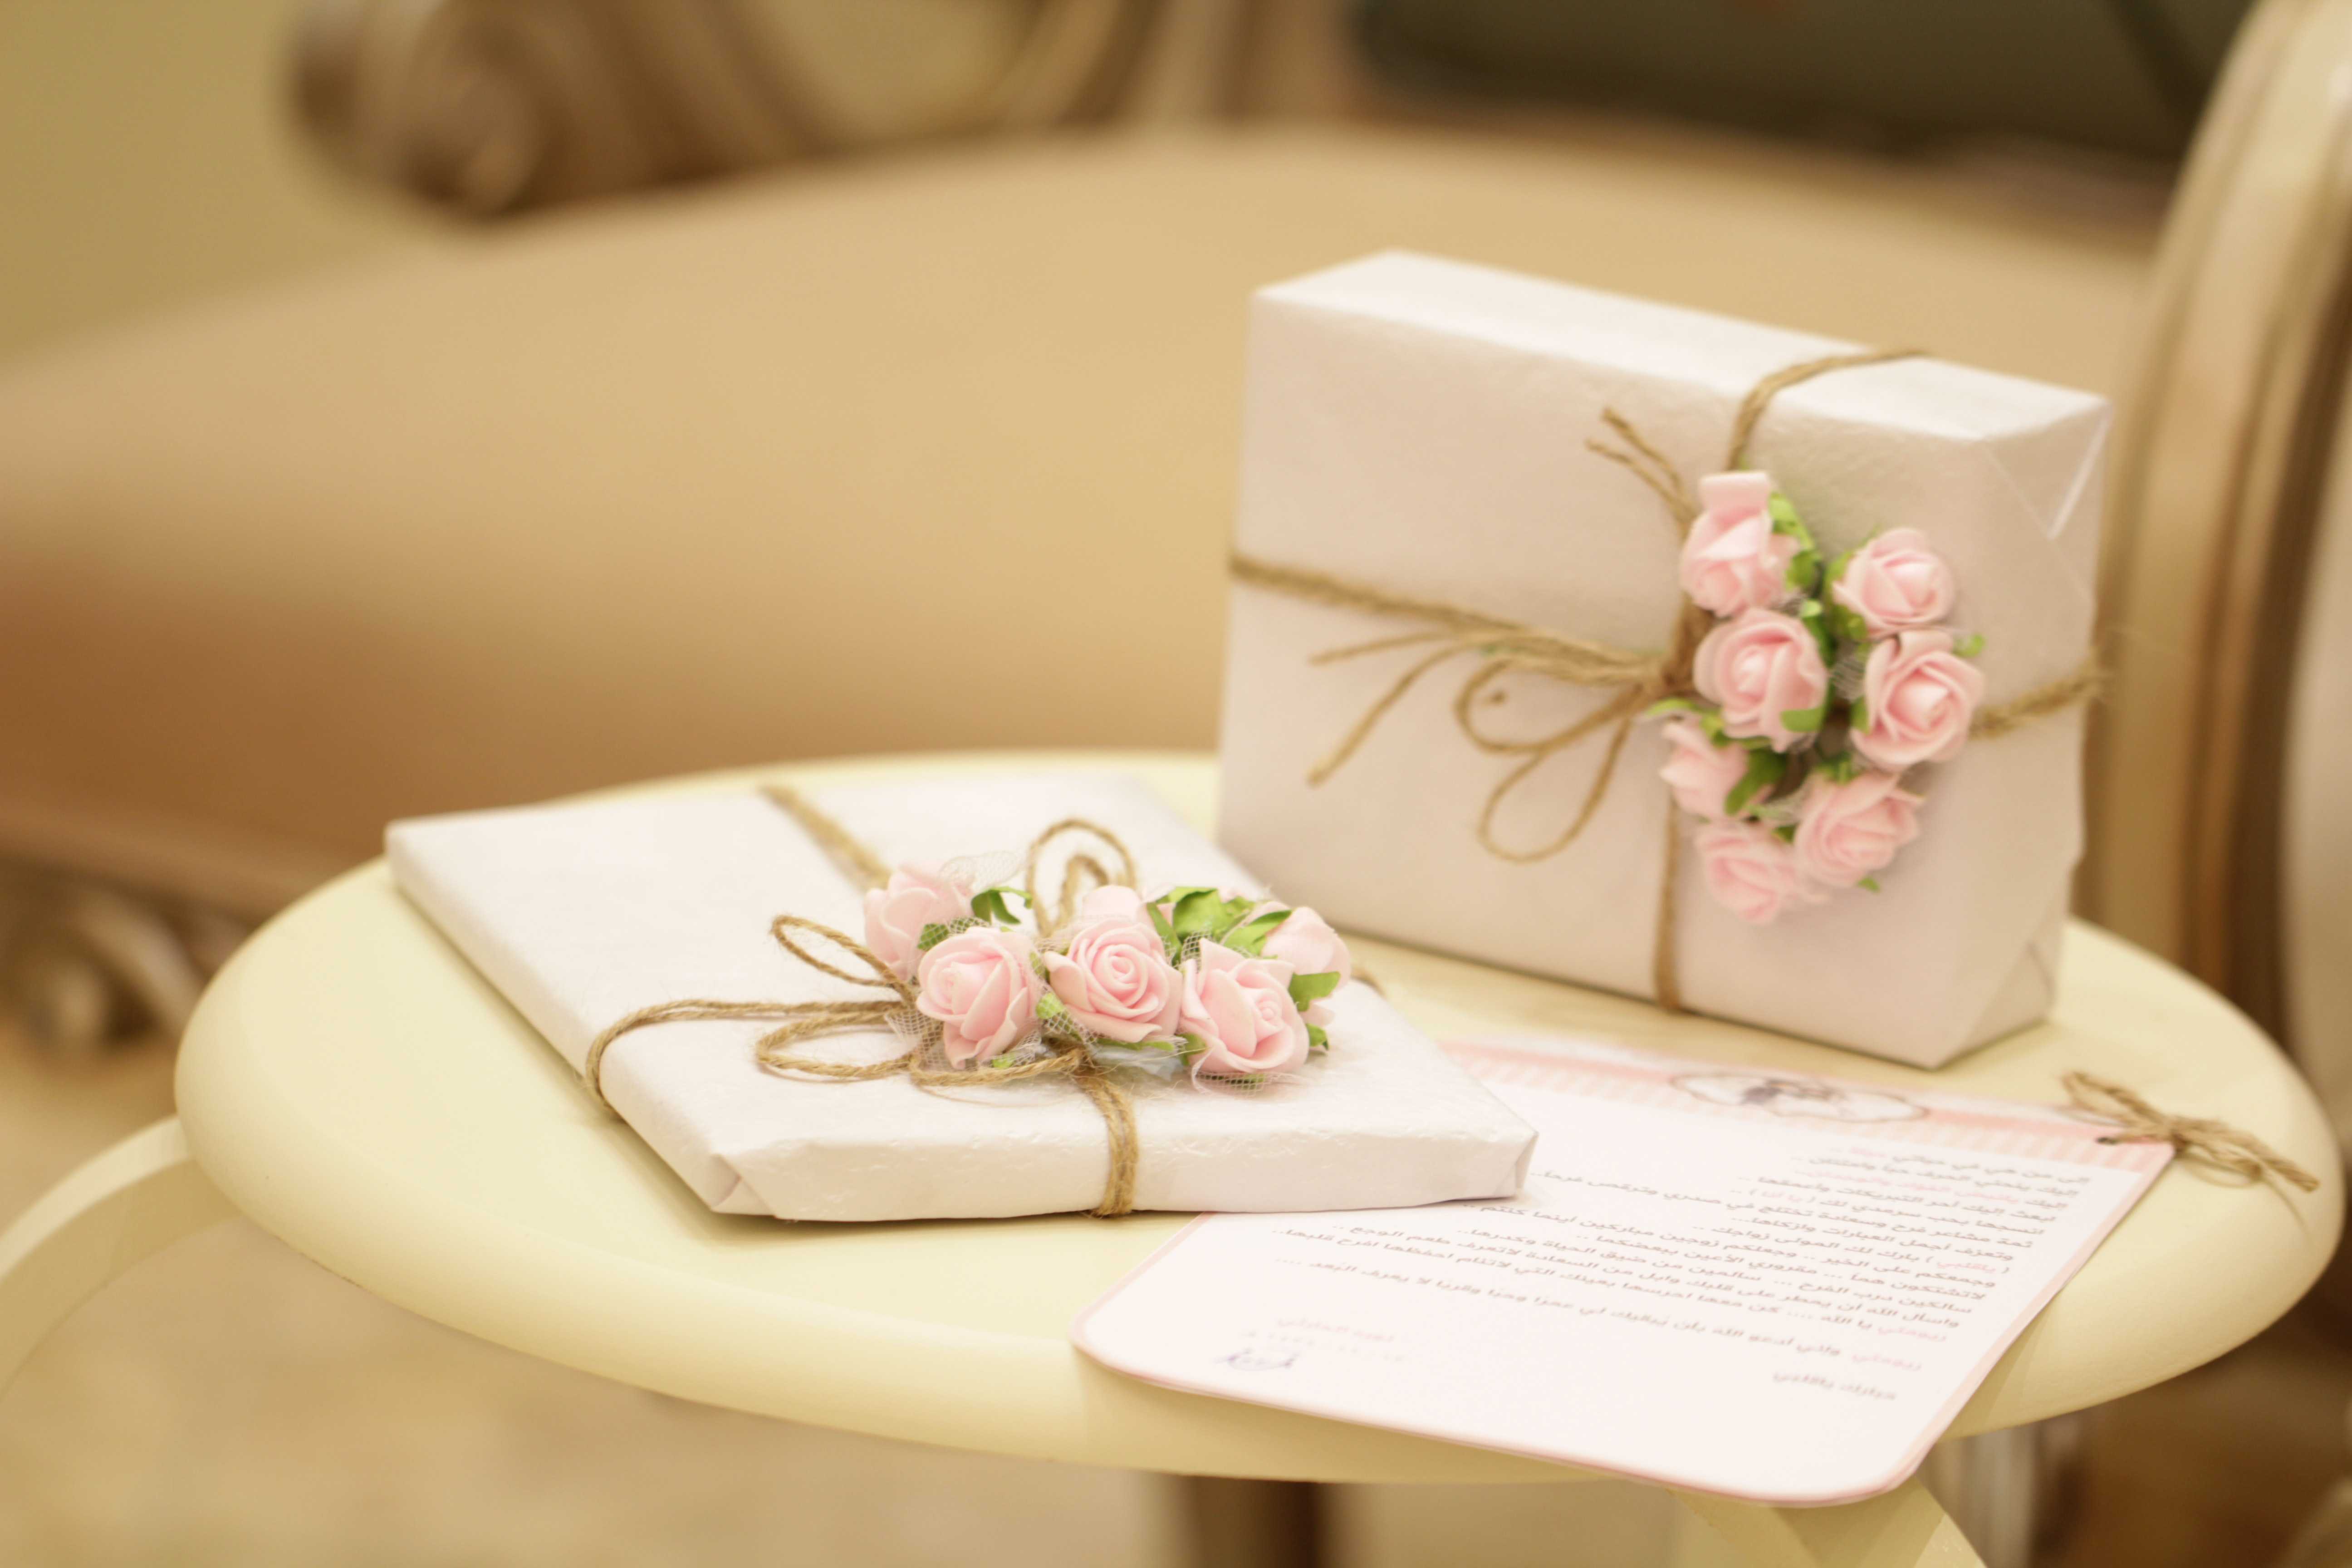 Souvenirs can be used to commemorate special moments such as weddings